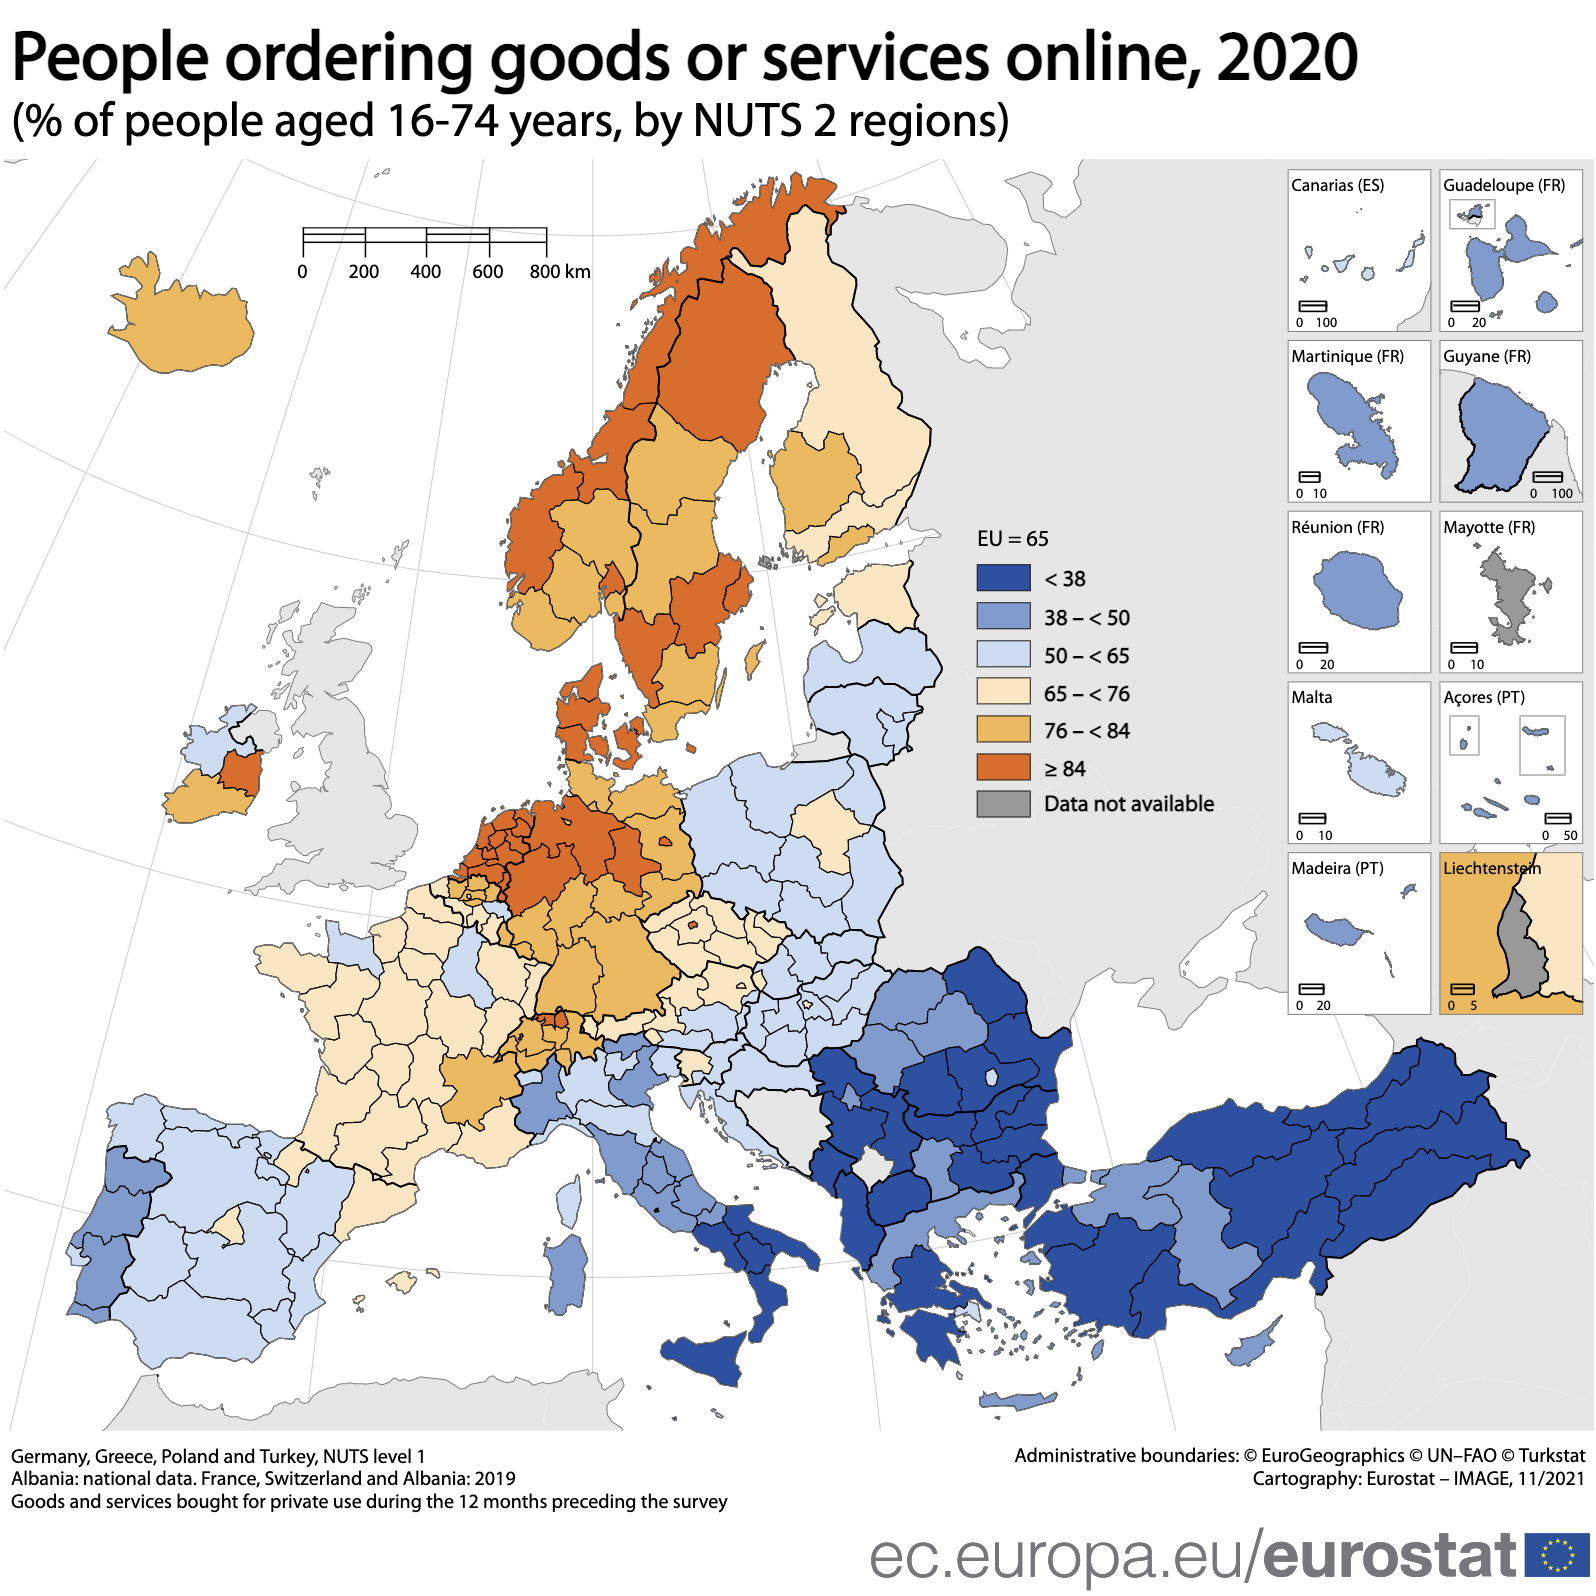 EU MAP: people (% of people aged 16-74 years old) ordering goods and services online, 2020, by NUTS 2 regions